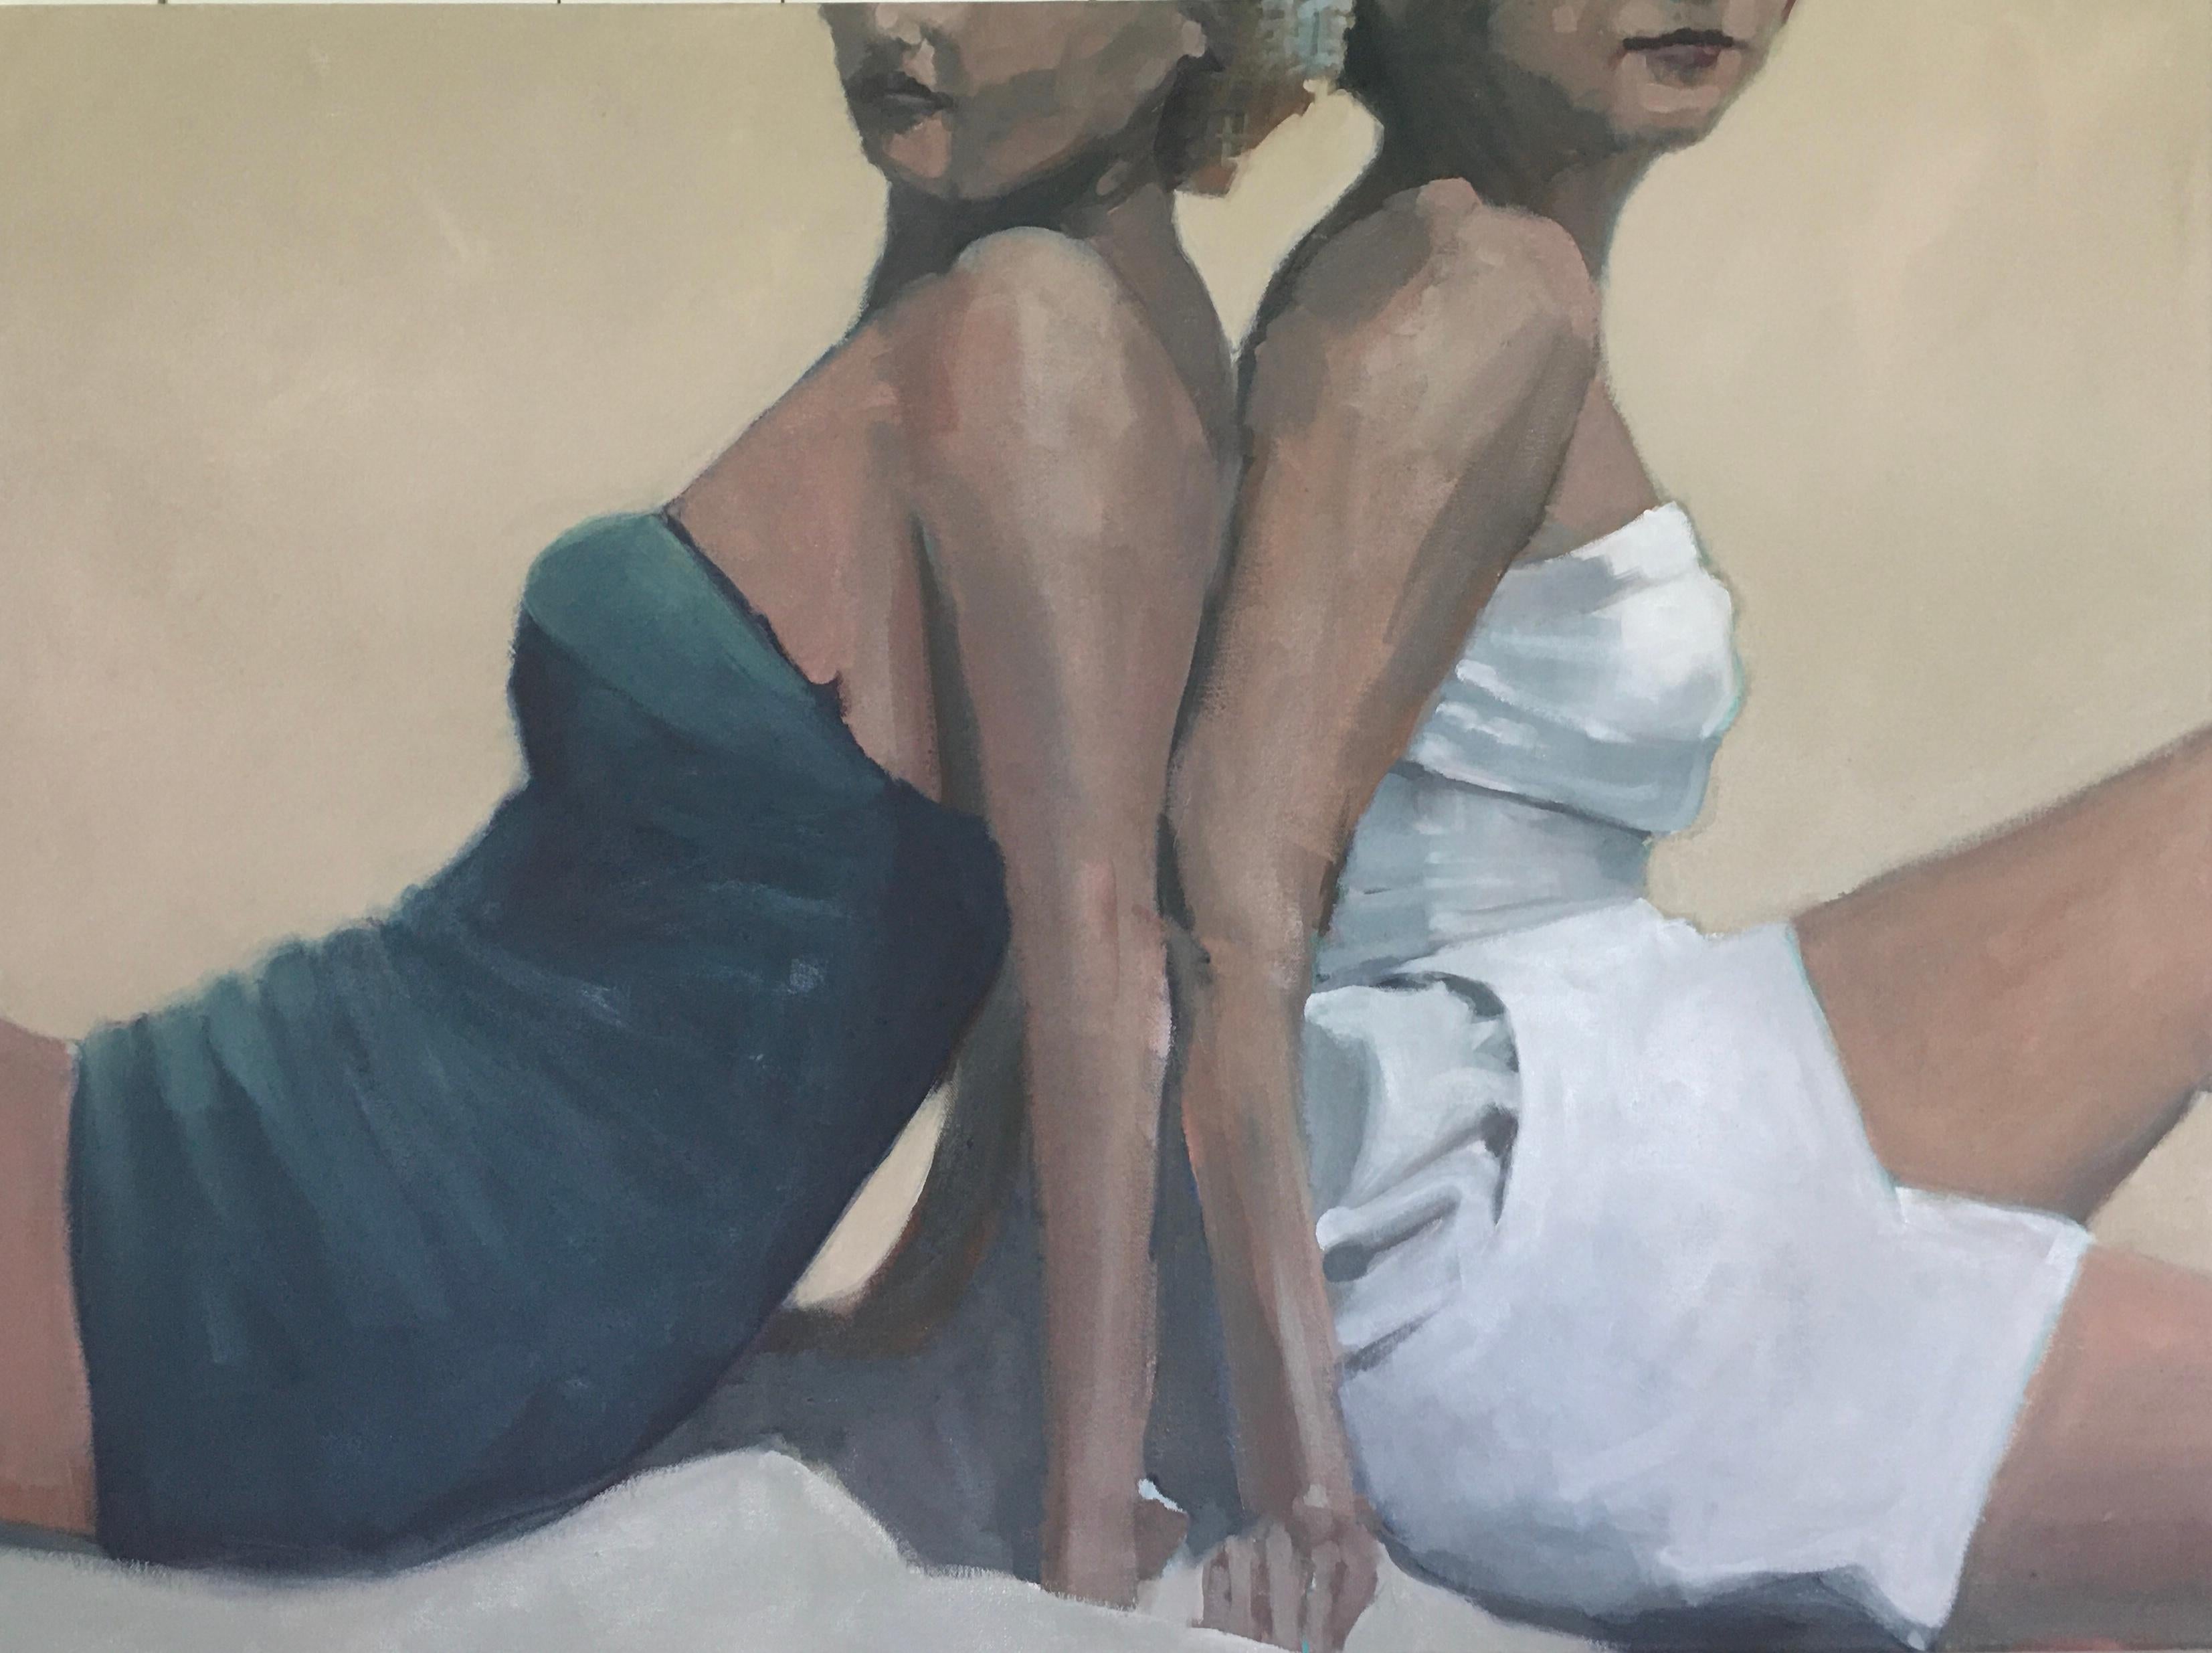 This beach painting, "Back to Back in Amber Sky", is a 30x40 oil painting on canvas by artist Beth Dacey featuring two woman sitting together on the sand of the beach. One woman has a white bathing suit and the other has a blue bathing suit.  The